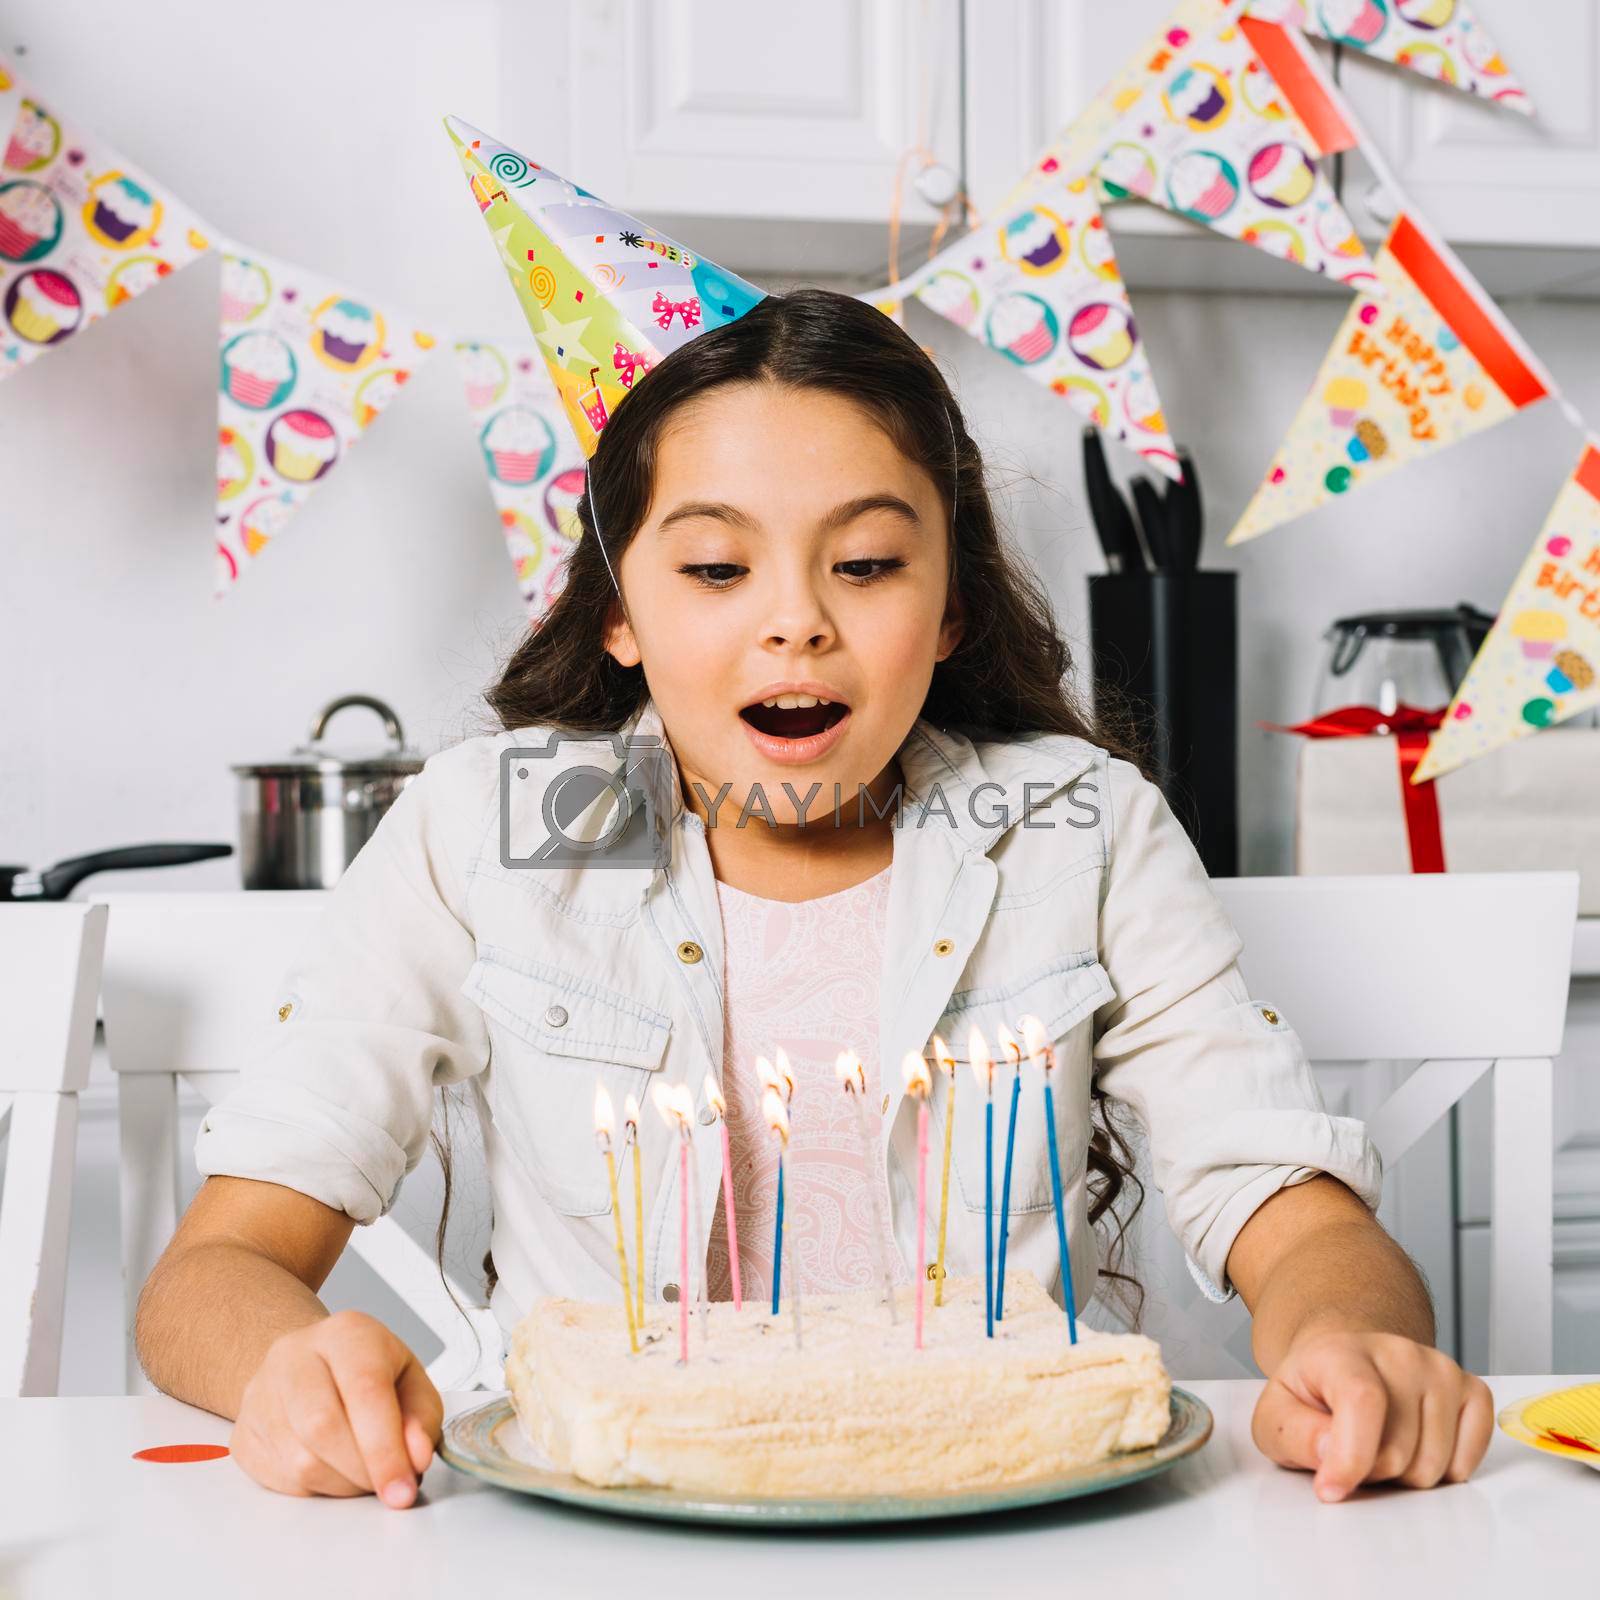 Royalty free image of surprised birthday girl blowing cake with illuminated candles by Zahard